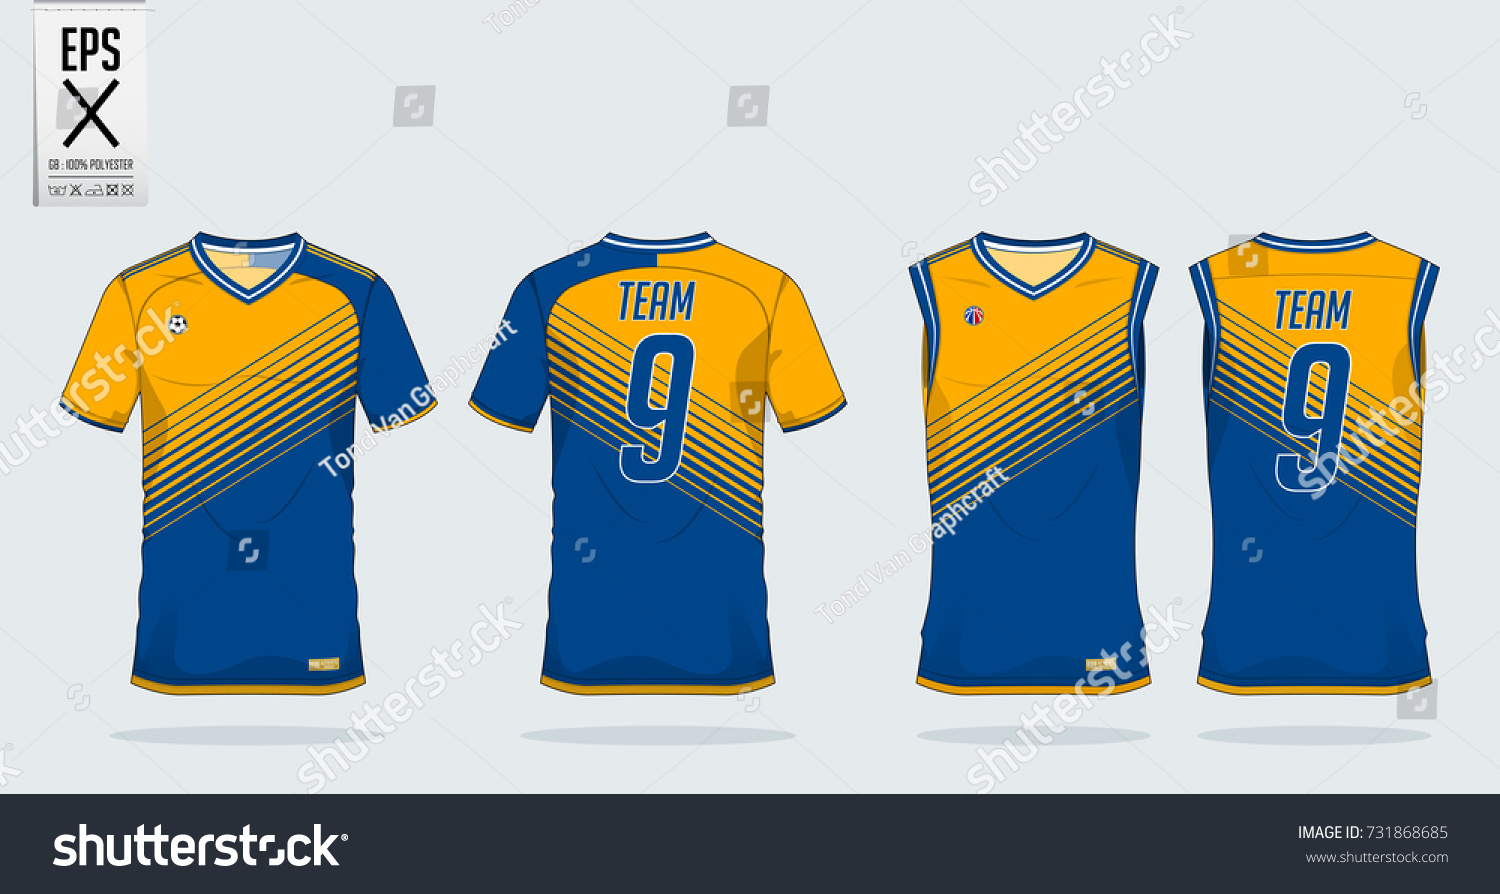 yellow and blue football jersey